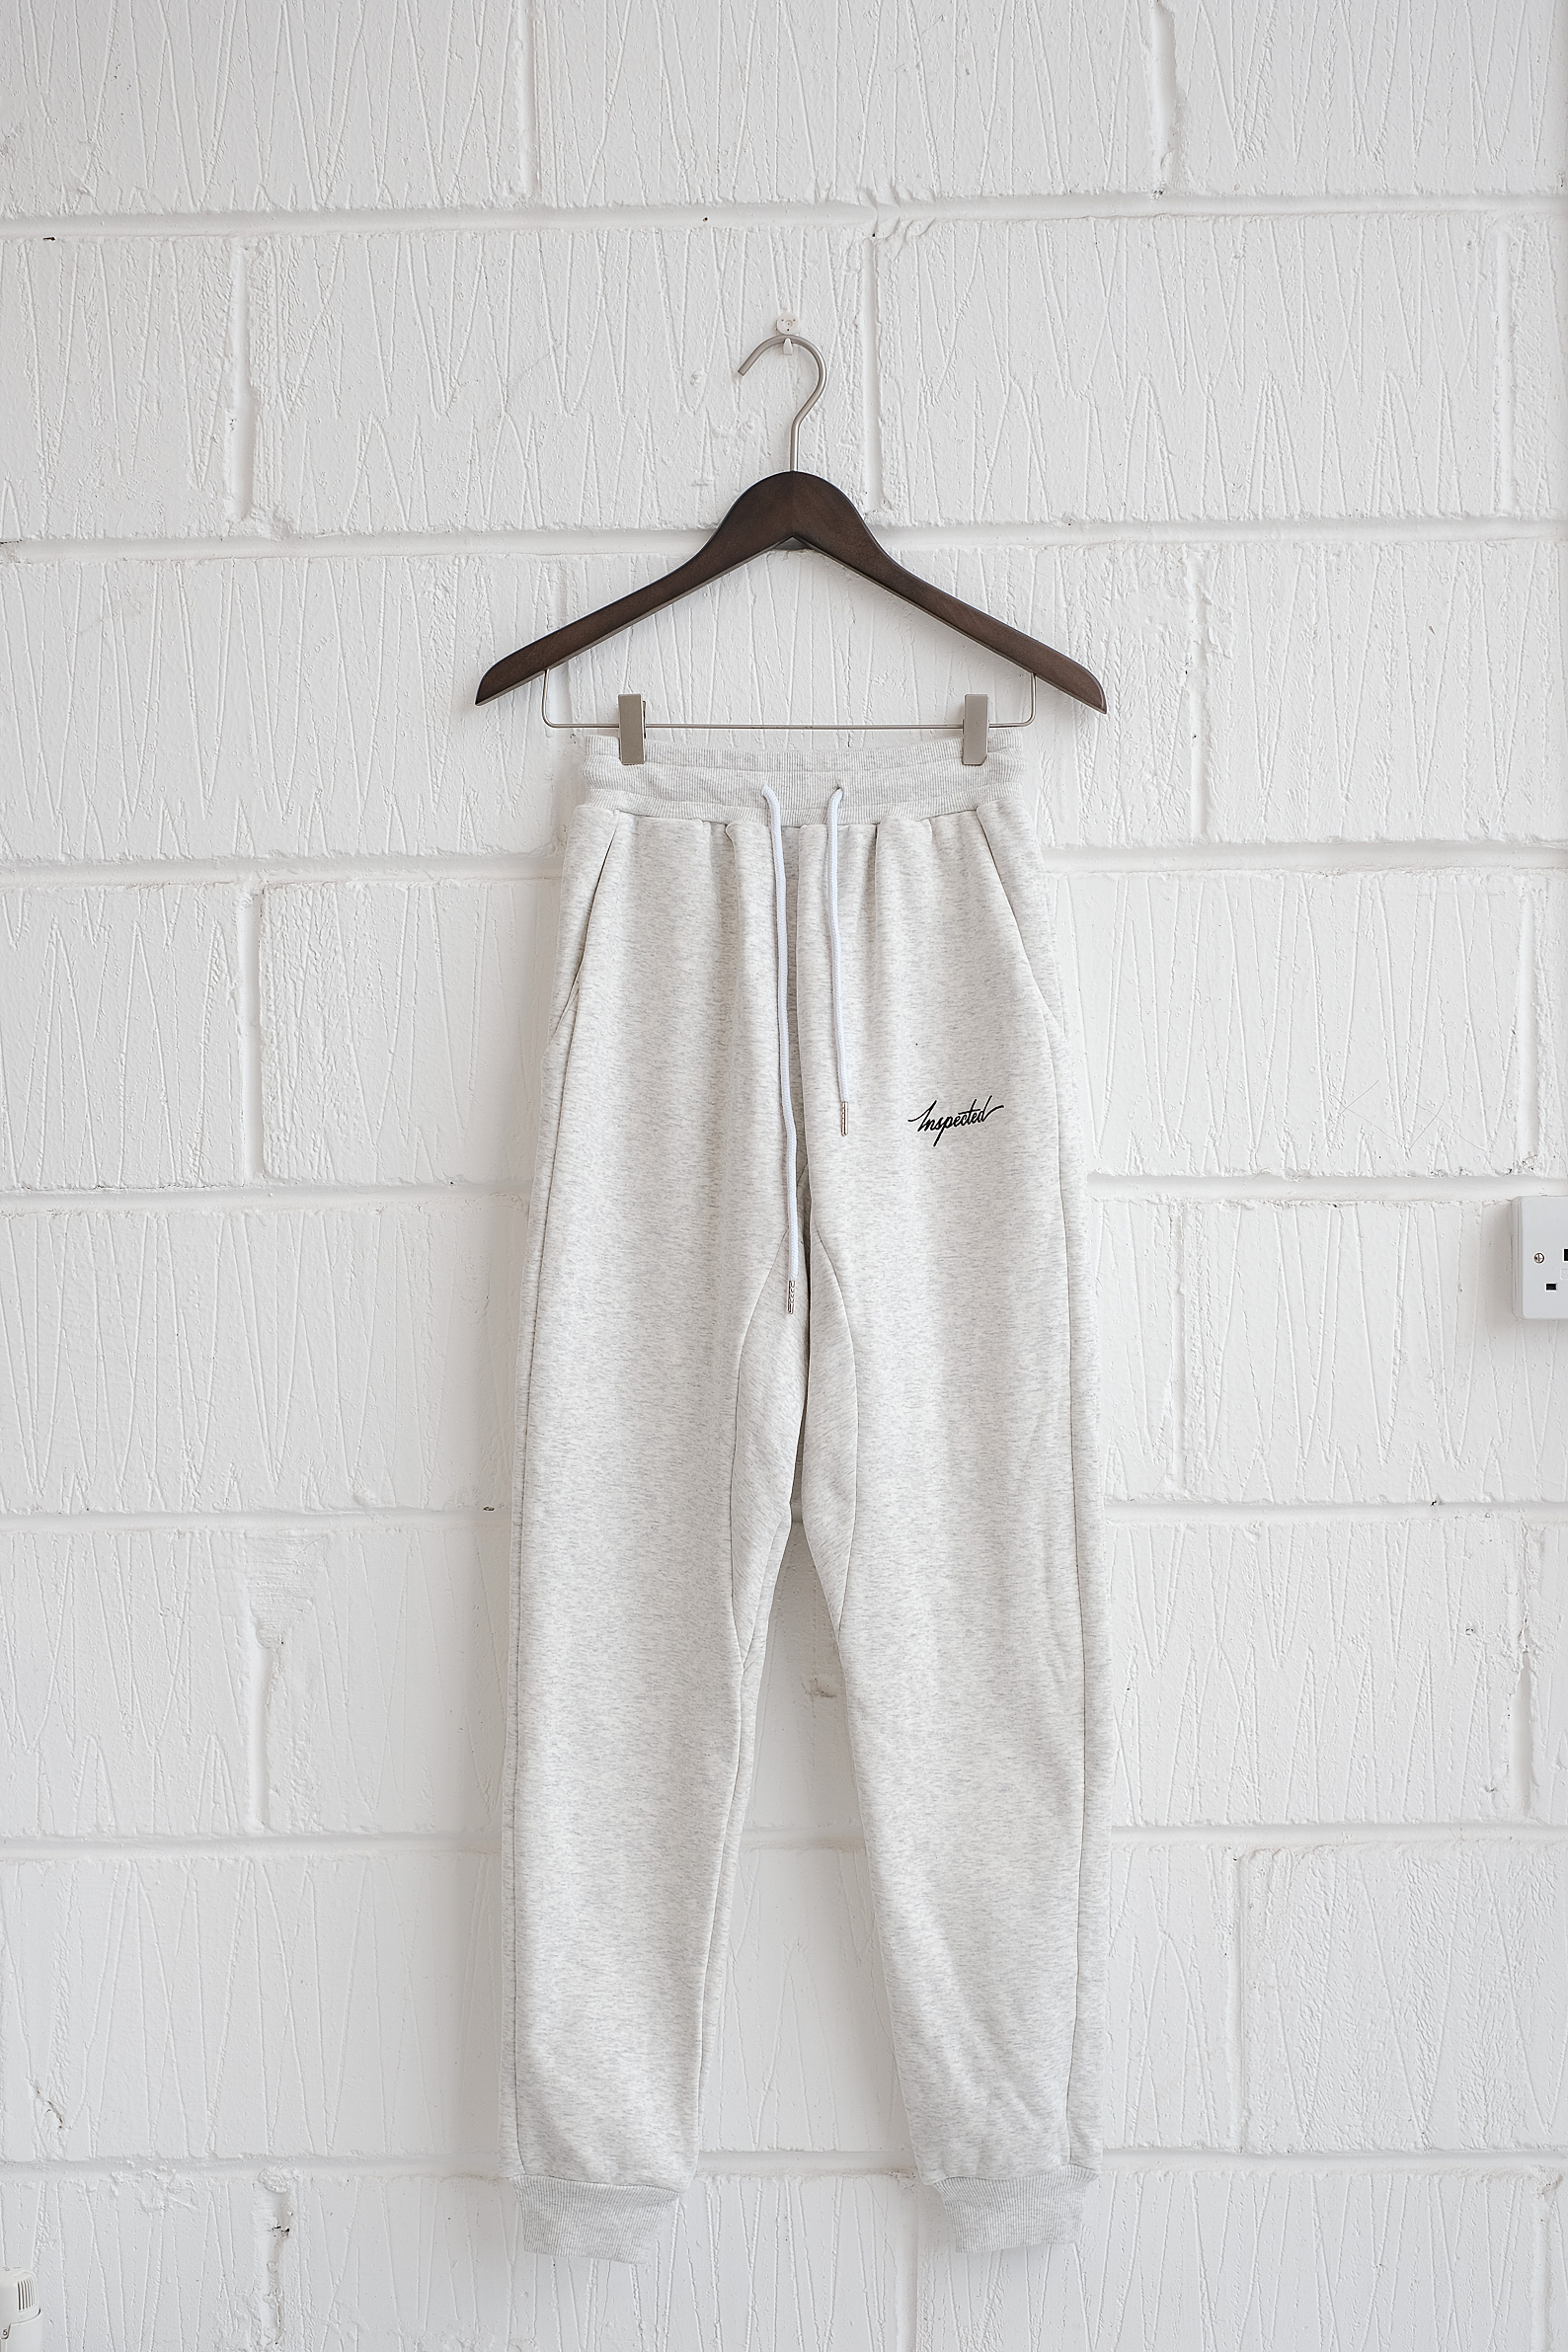 SAMPLE PANTS — RELAXED ASH